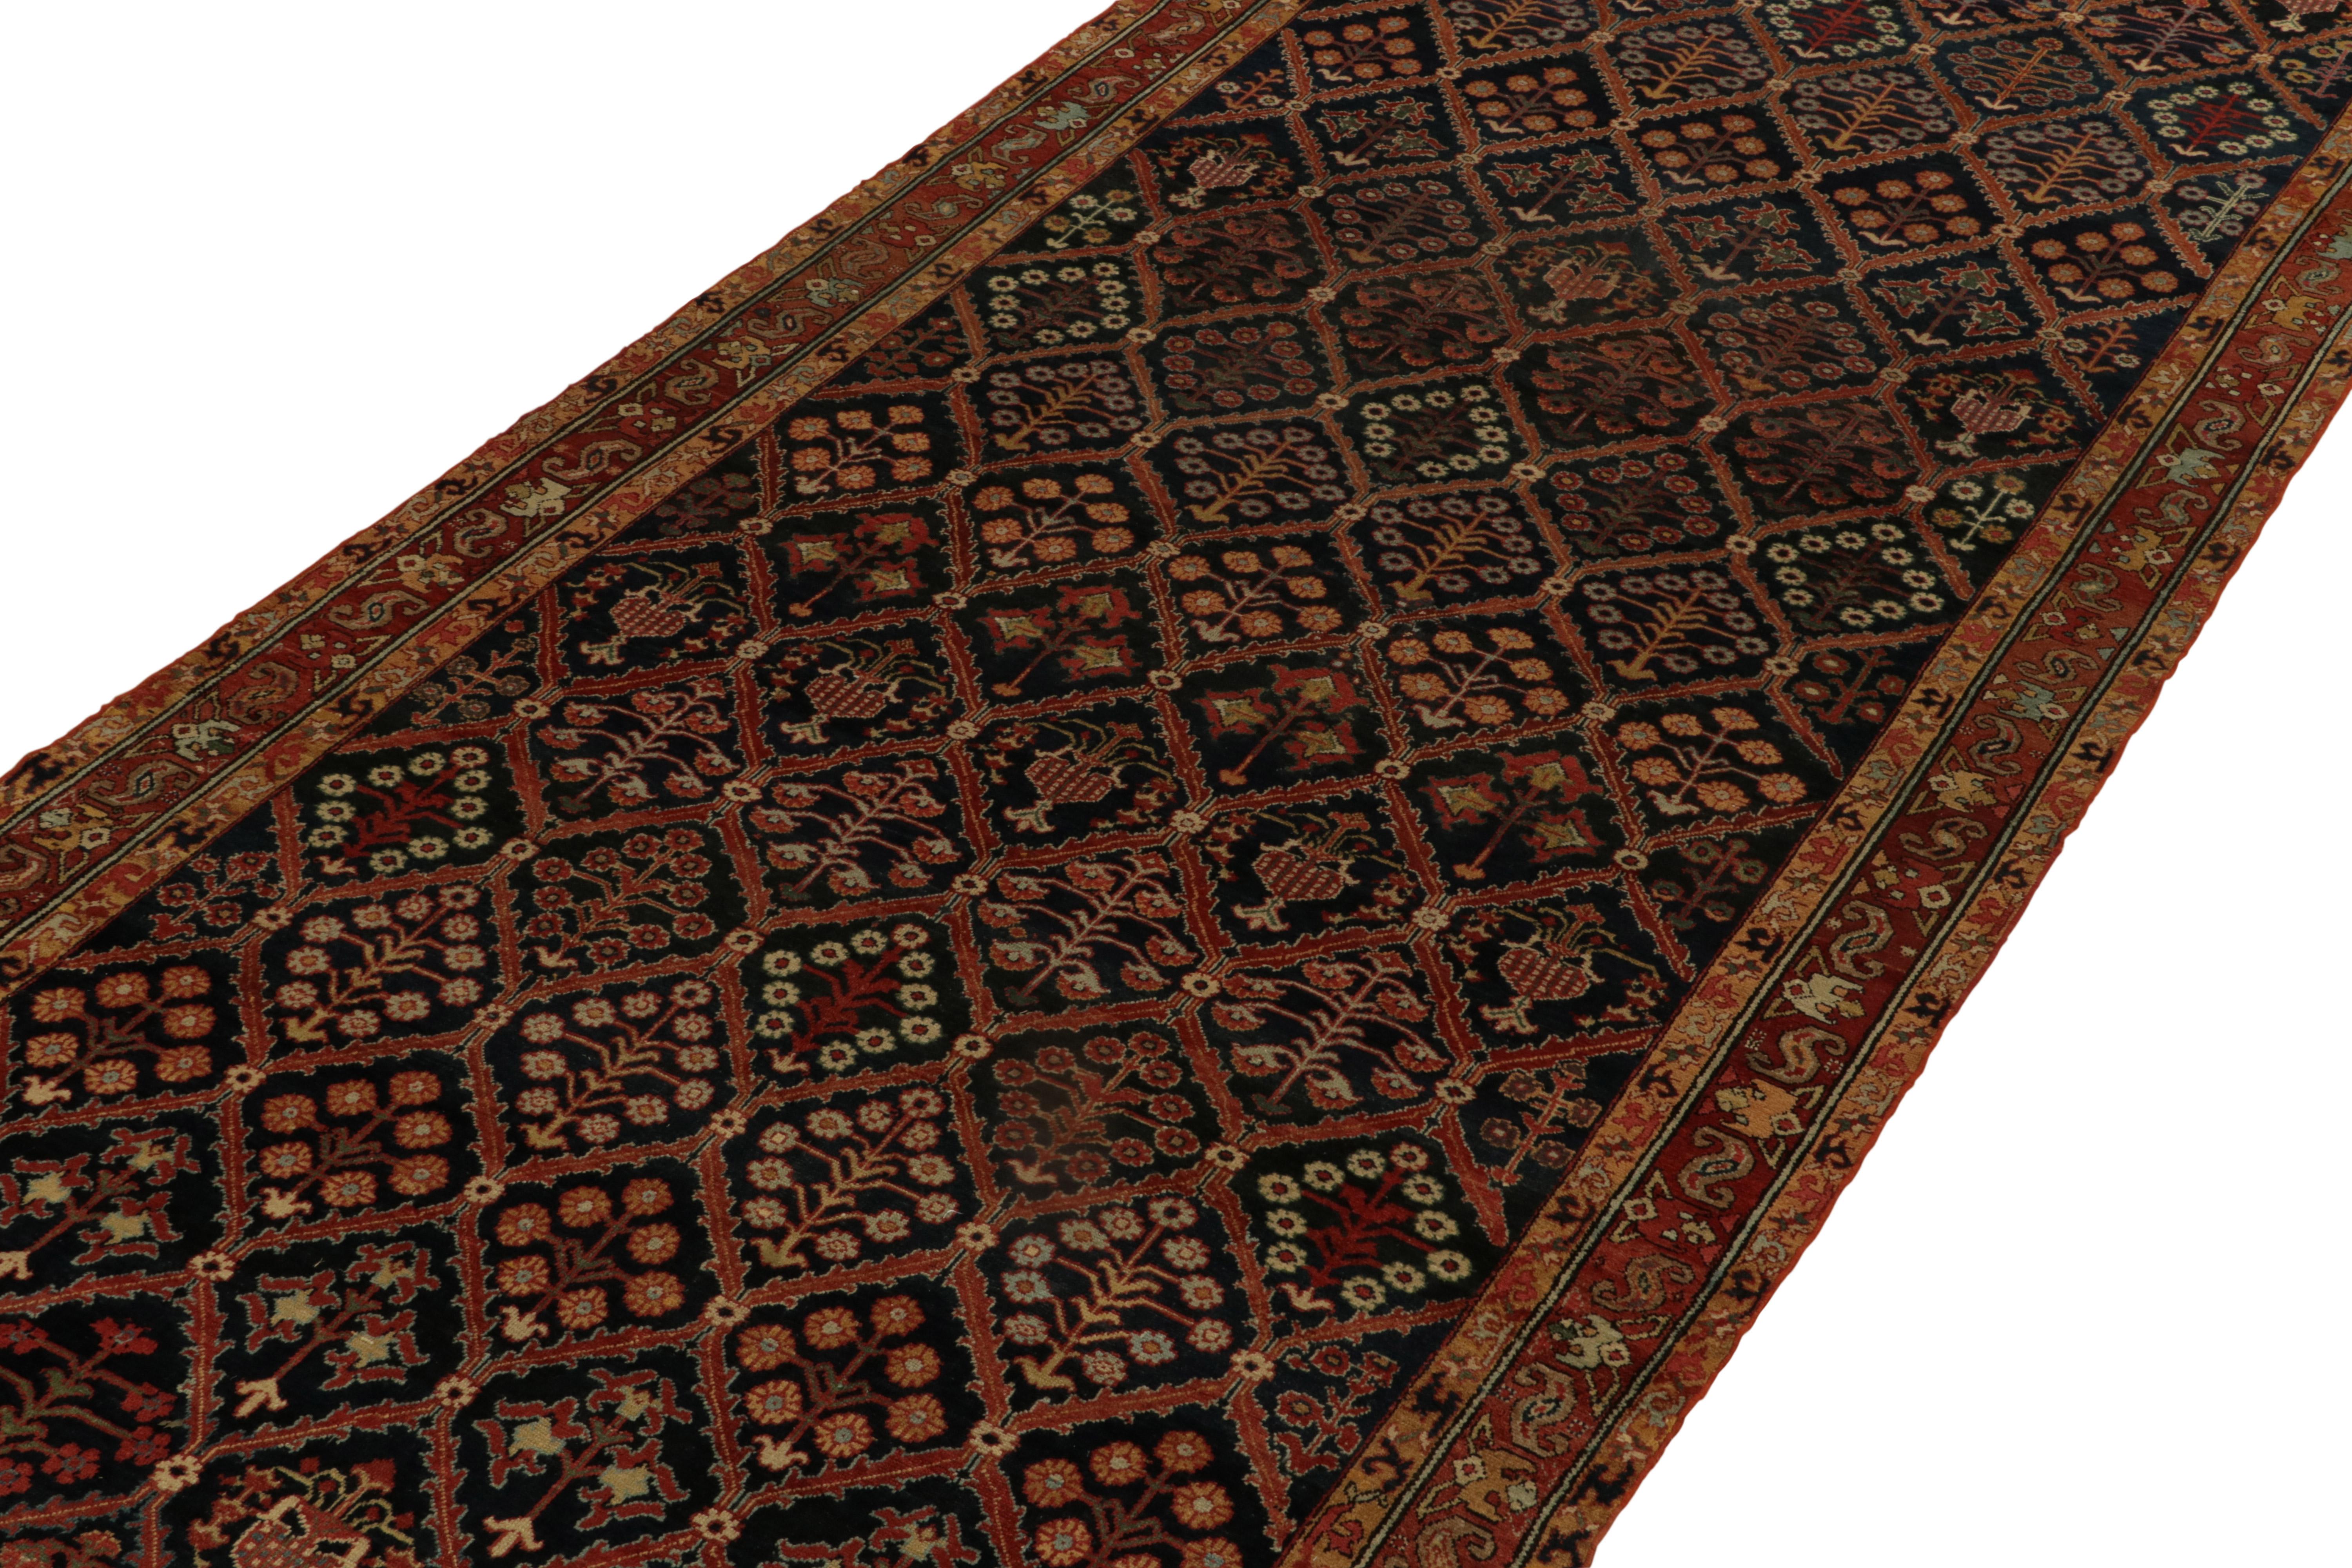 Rare Antique Persian Joshaghan rug in Red, Black & Golden-Brown Floral Patterns In Good Condition For Sale In Long Island City, NY